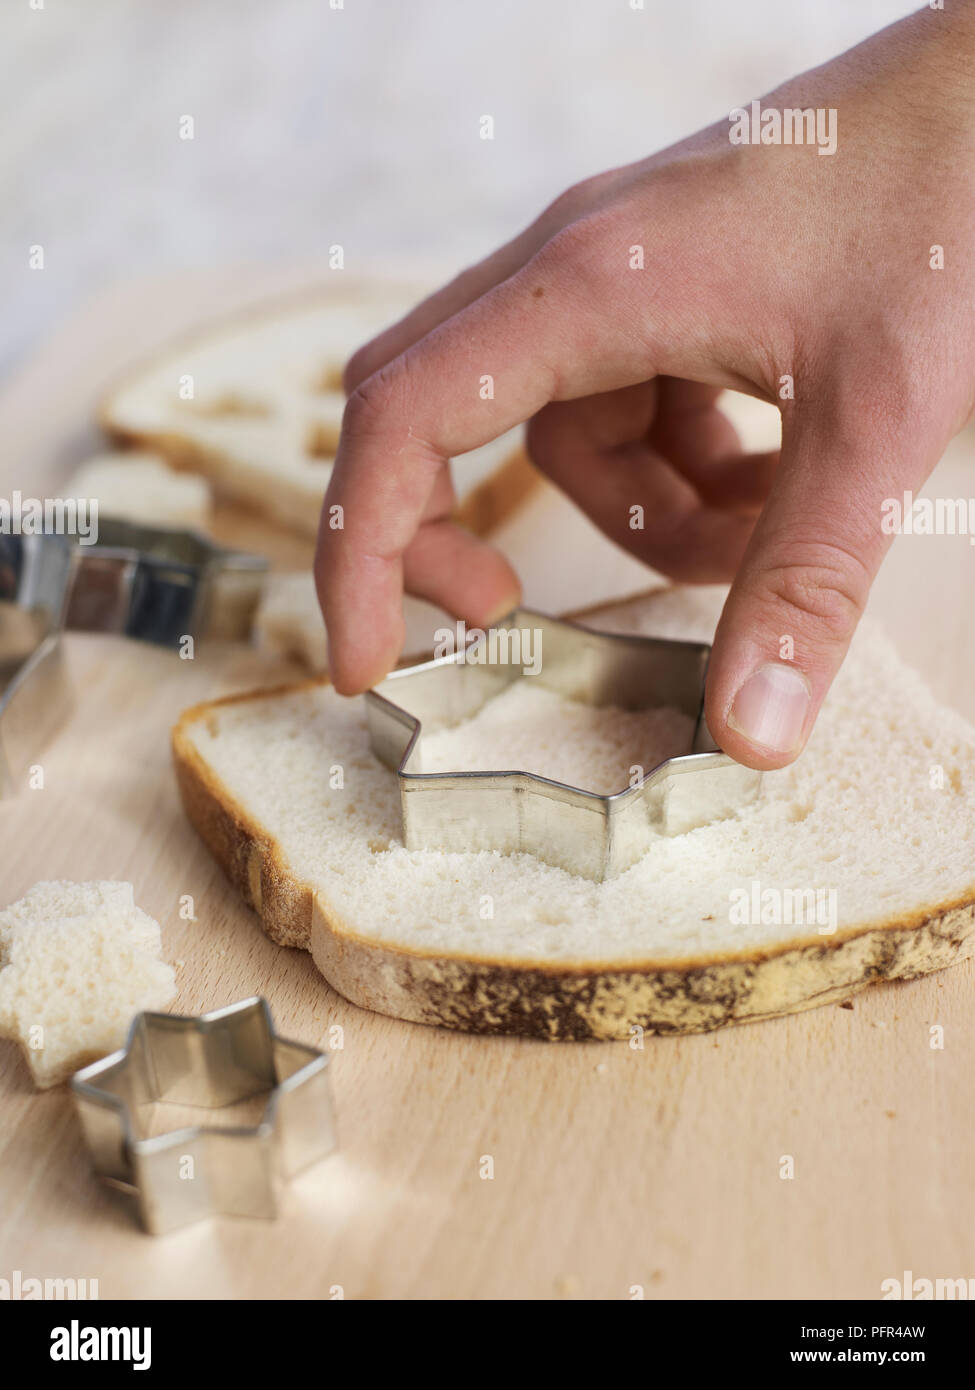 Using star-shaped cookie cutter on slice of white bread, to make croutons Stock Photo